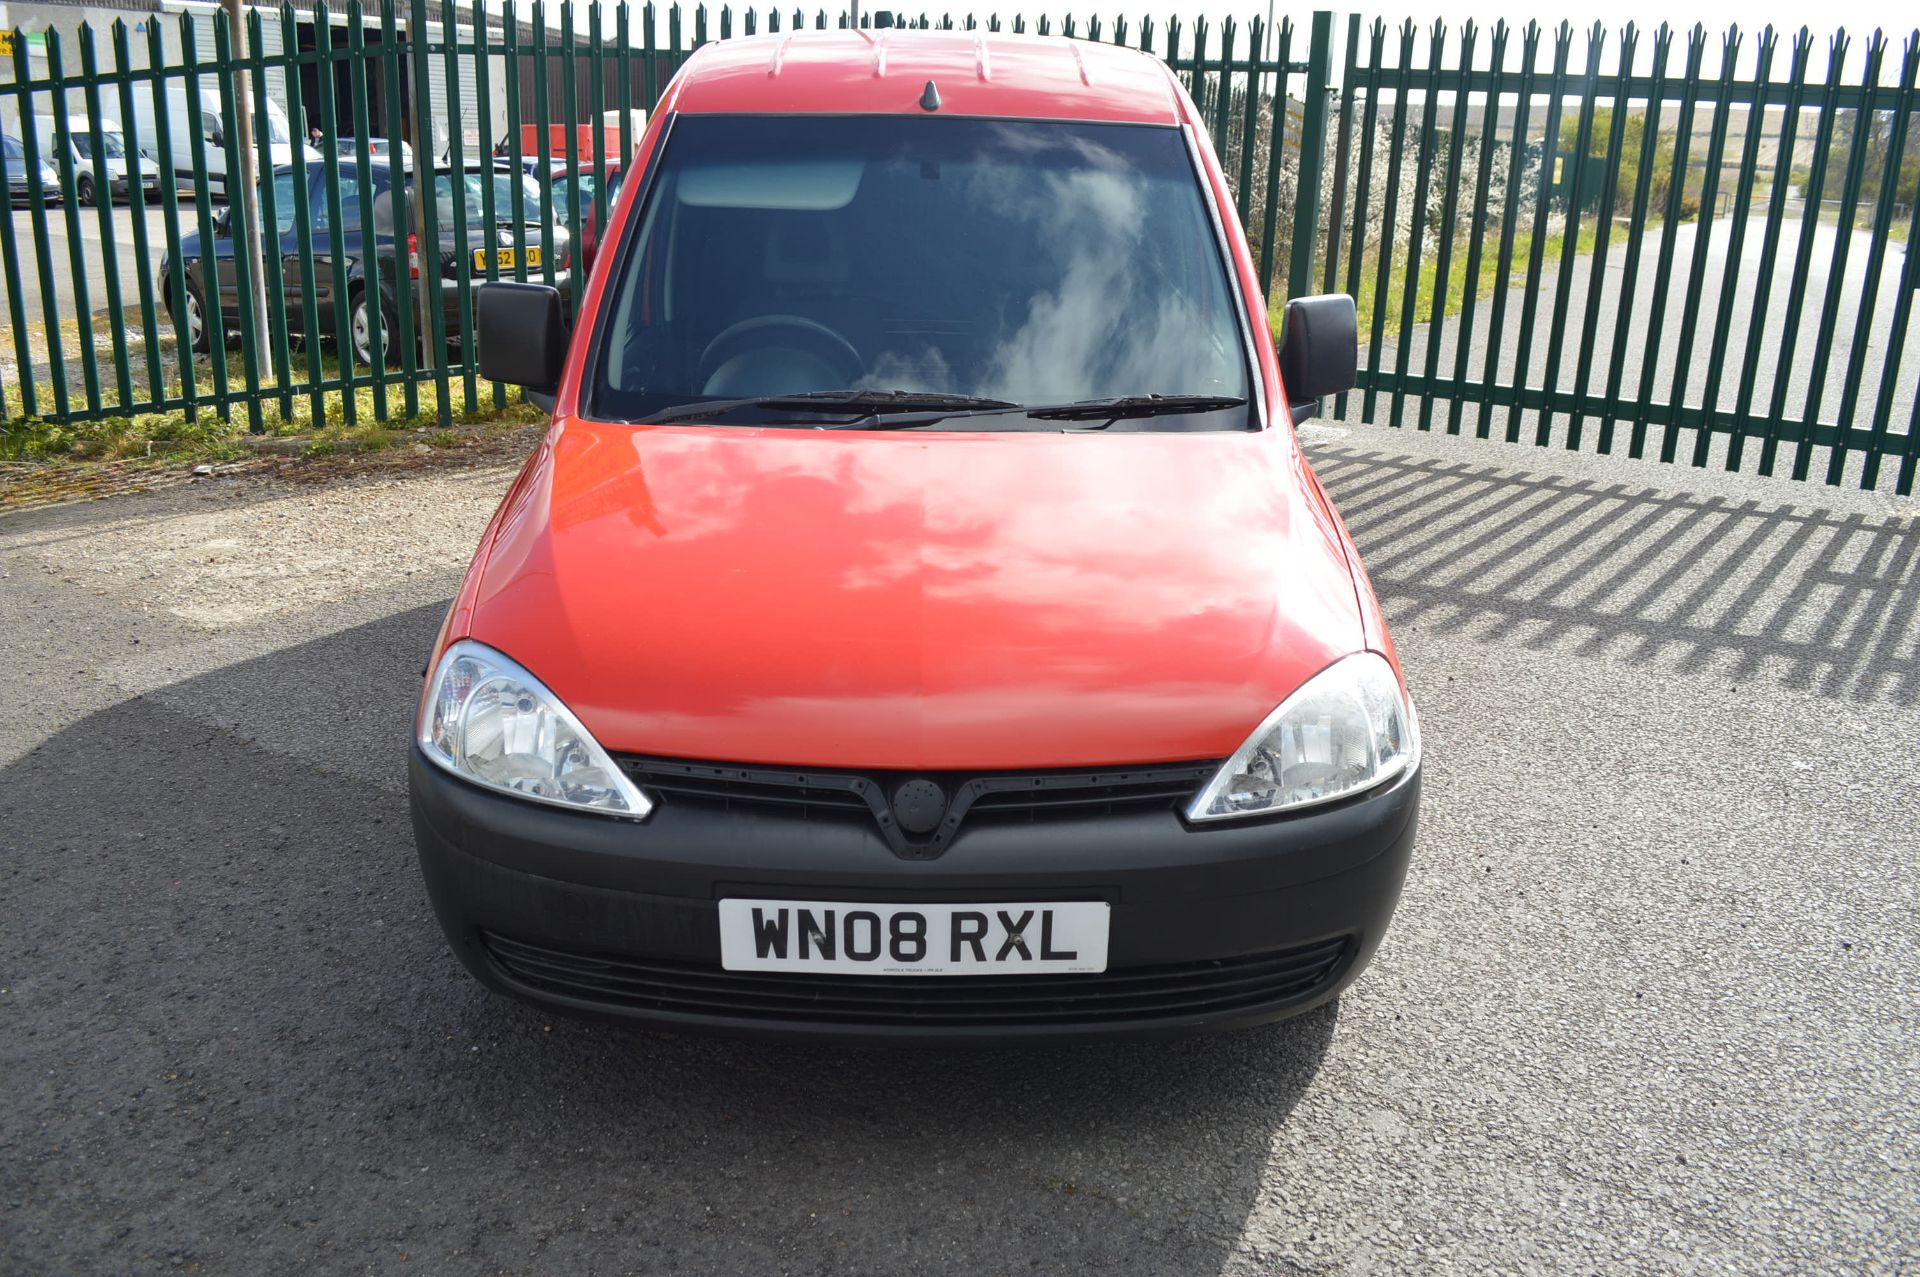 2008/08 REG VAUXHALL COMBO 1700 CDTI - ROYAL MAIL OWNED, 1 OWNER FROM NEW! *NO VAT* - Image 2 of 21